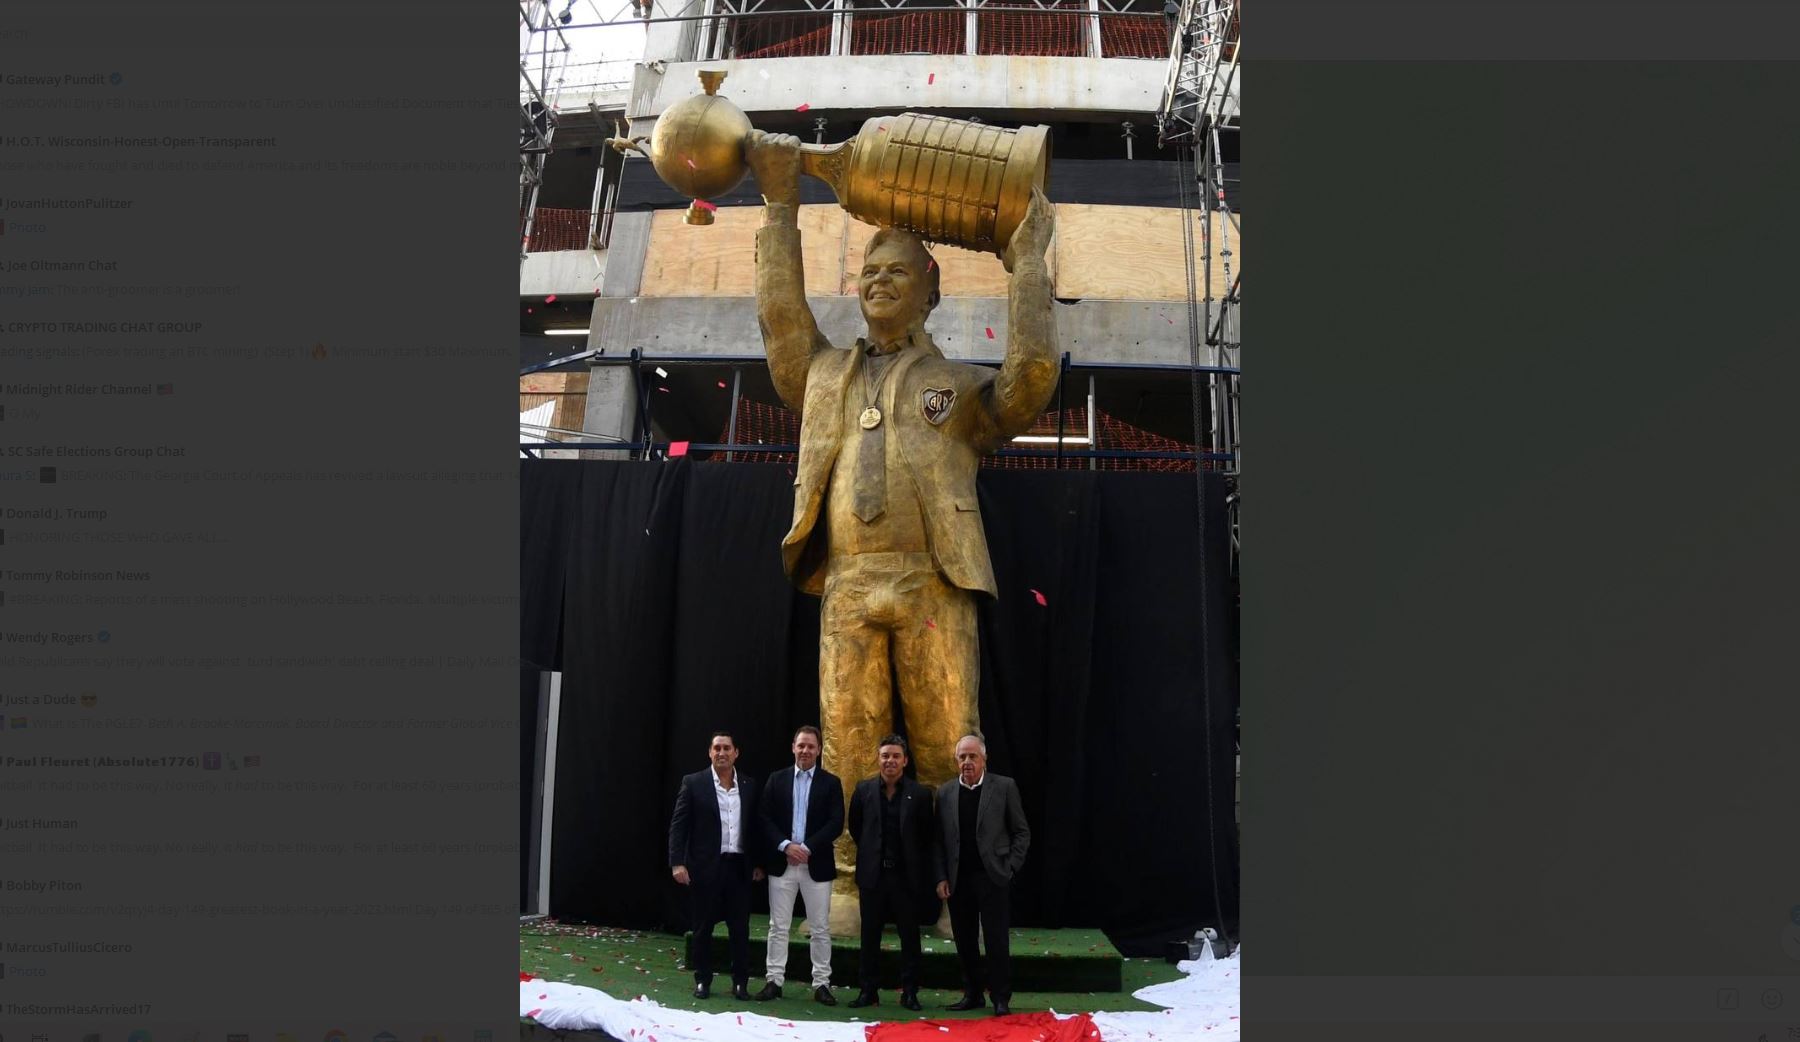 Fiery Fiasco: Massive 26-Foot Soccer Legend Statue Sparks Outrage with Enormous Protruding Orbs